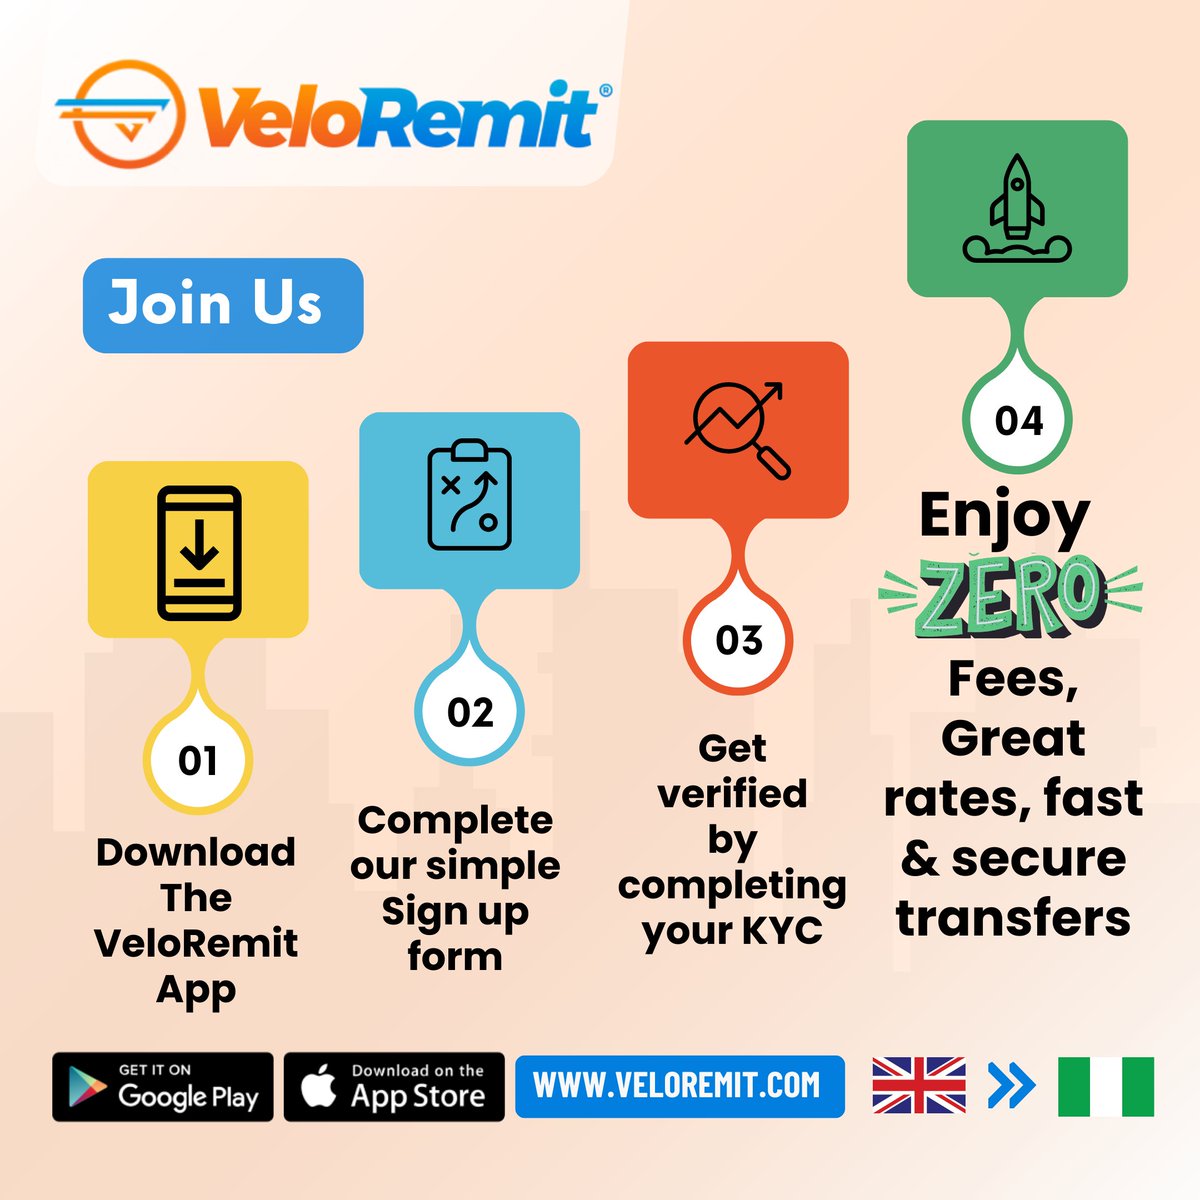 🇬🇧🇳🇬Join us on VeloRemit for hassle-free money transfers! Download the app, complete sign up and KYC to start enjoying zero fees, great rates, fast and secure transfers🚀 #veloremit #moneytransfer #uktonigeria #zerofee #greatrates #fast #secure #JoinUs #nigeriansinuk #downloadnow